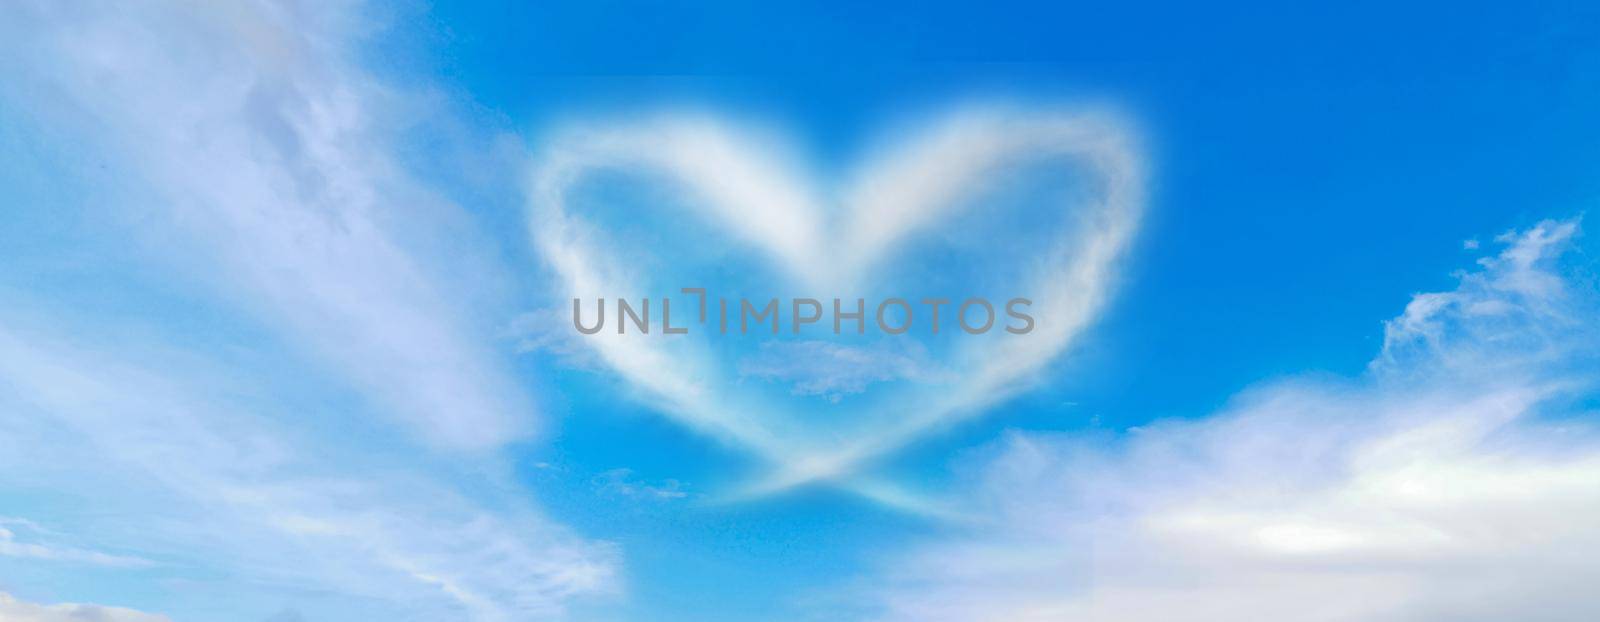 blue sky with hearts shape clouds. Beauty natural background.